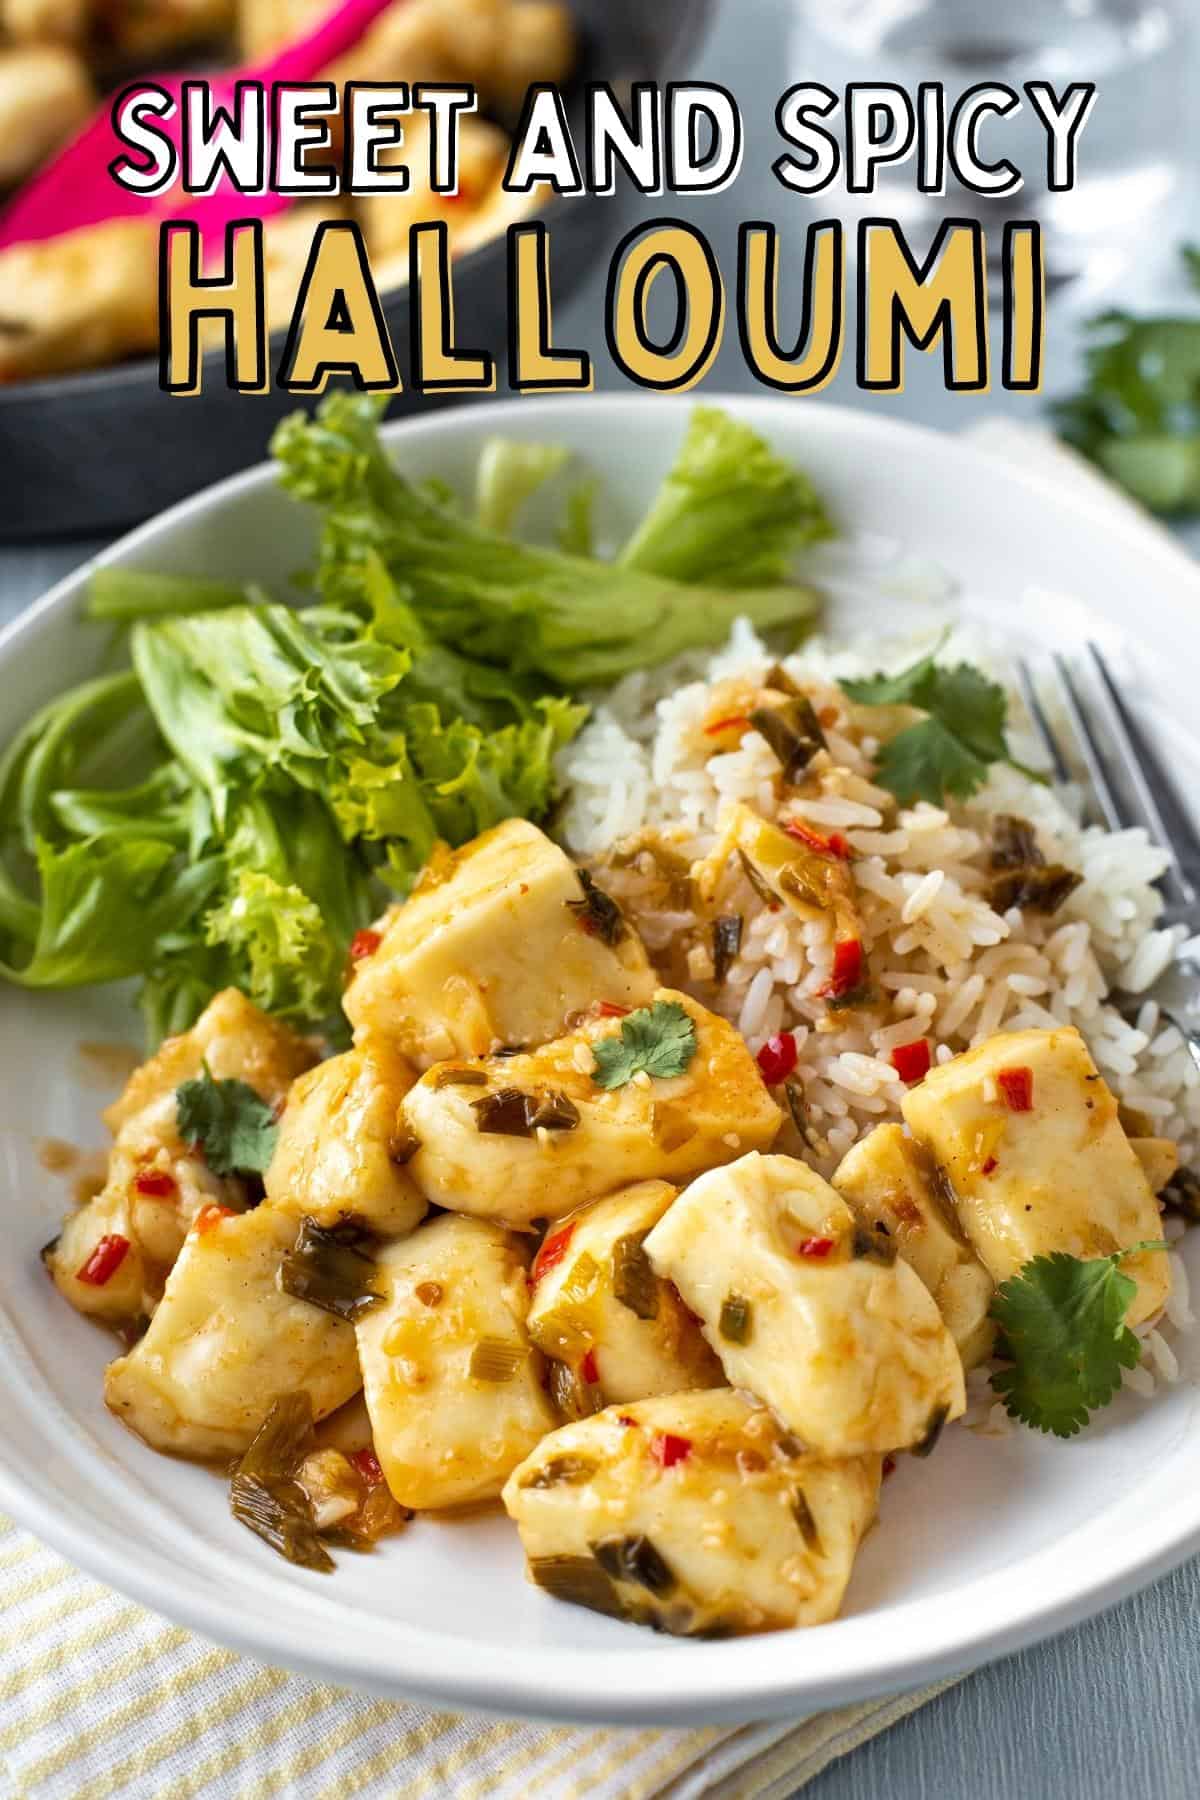 Chunks of halloumi cheese in a sweet and spicy sauce, served with rice and salad.